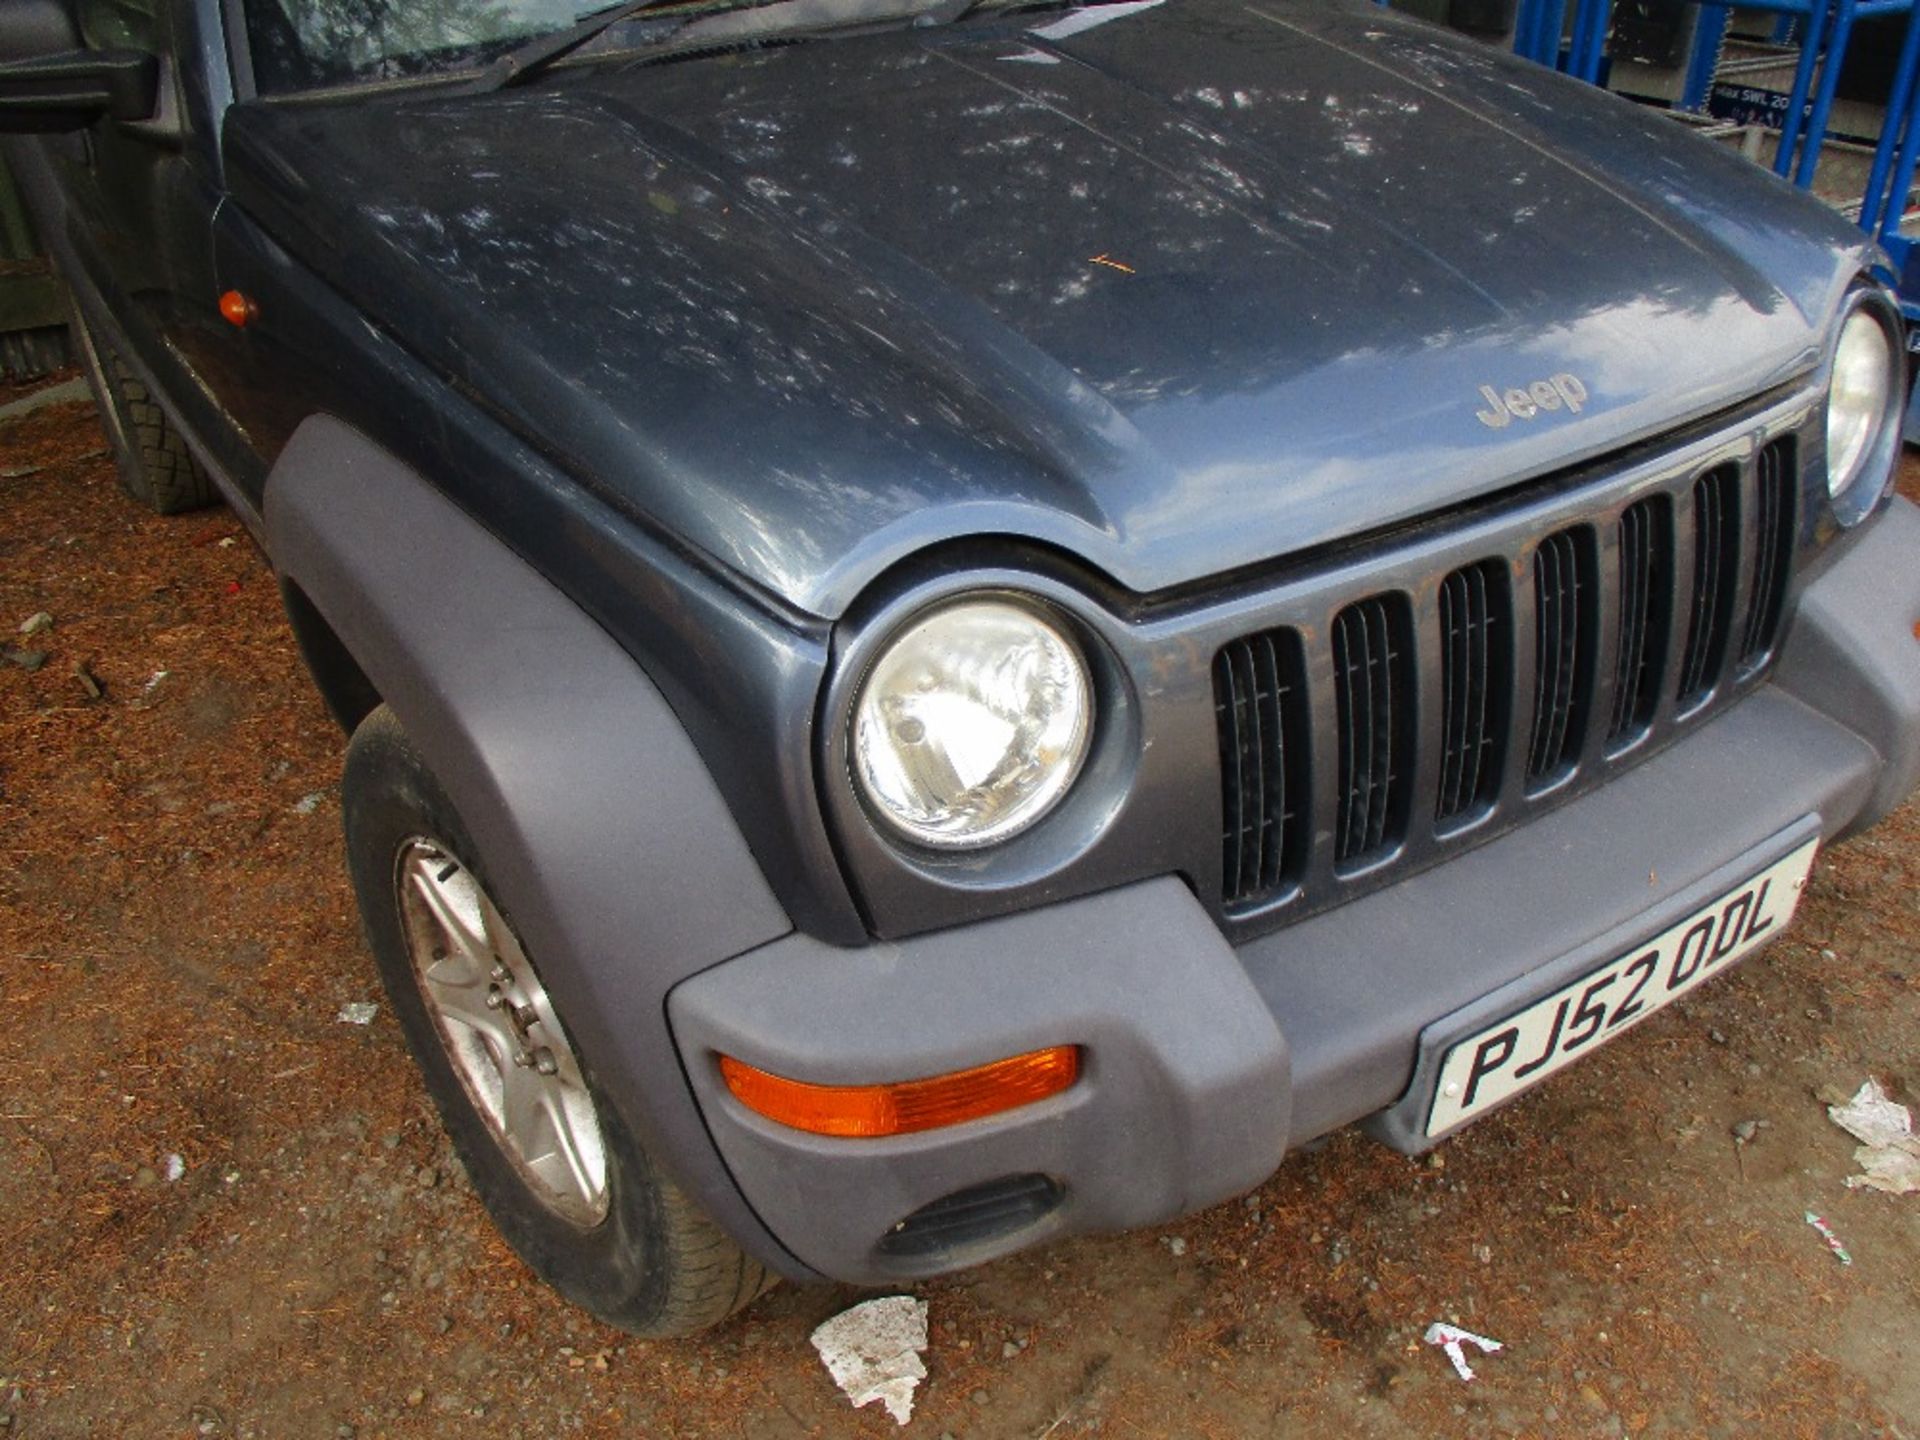 JEEP CHEROKEE DIESEL, BLUE, REG:PJ52 ODL NEEDS NEW KEY BARREL WHEN TESTED WAS SEEN TO START DRIVE - Image 2 of 7